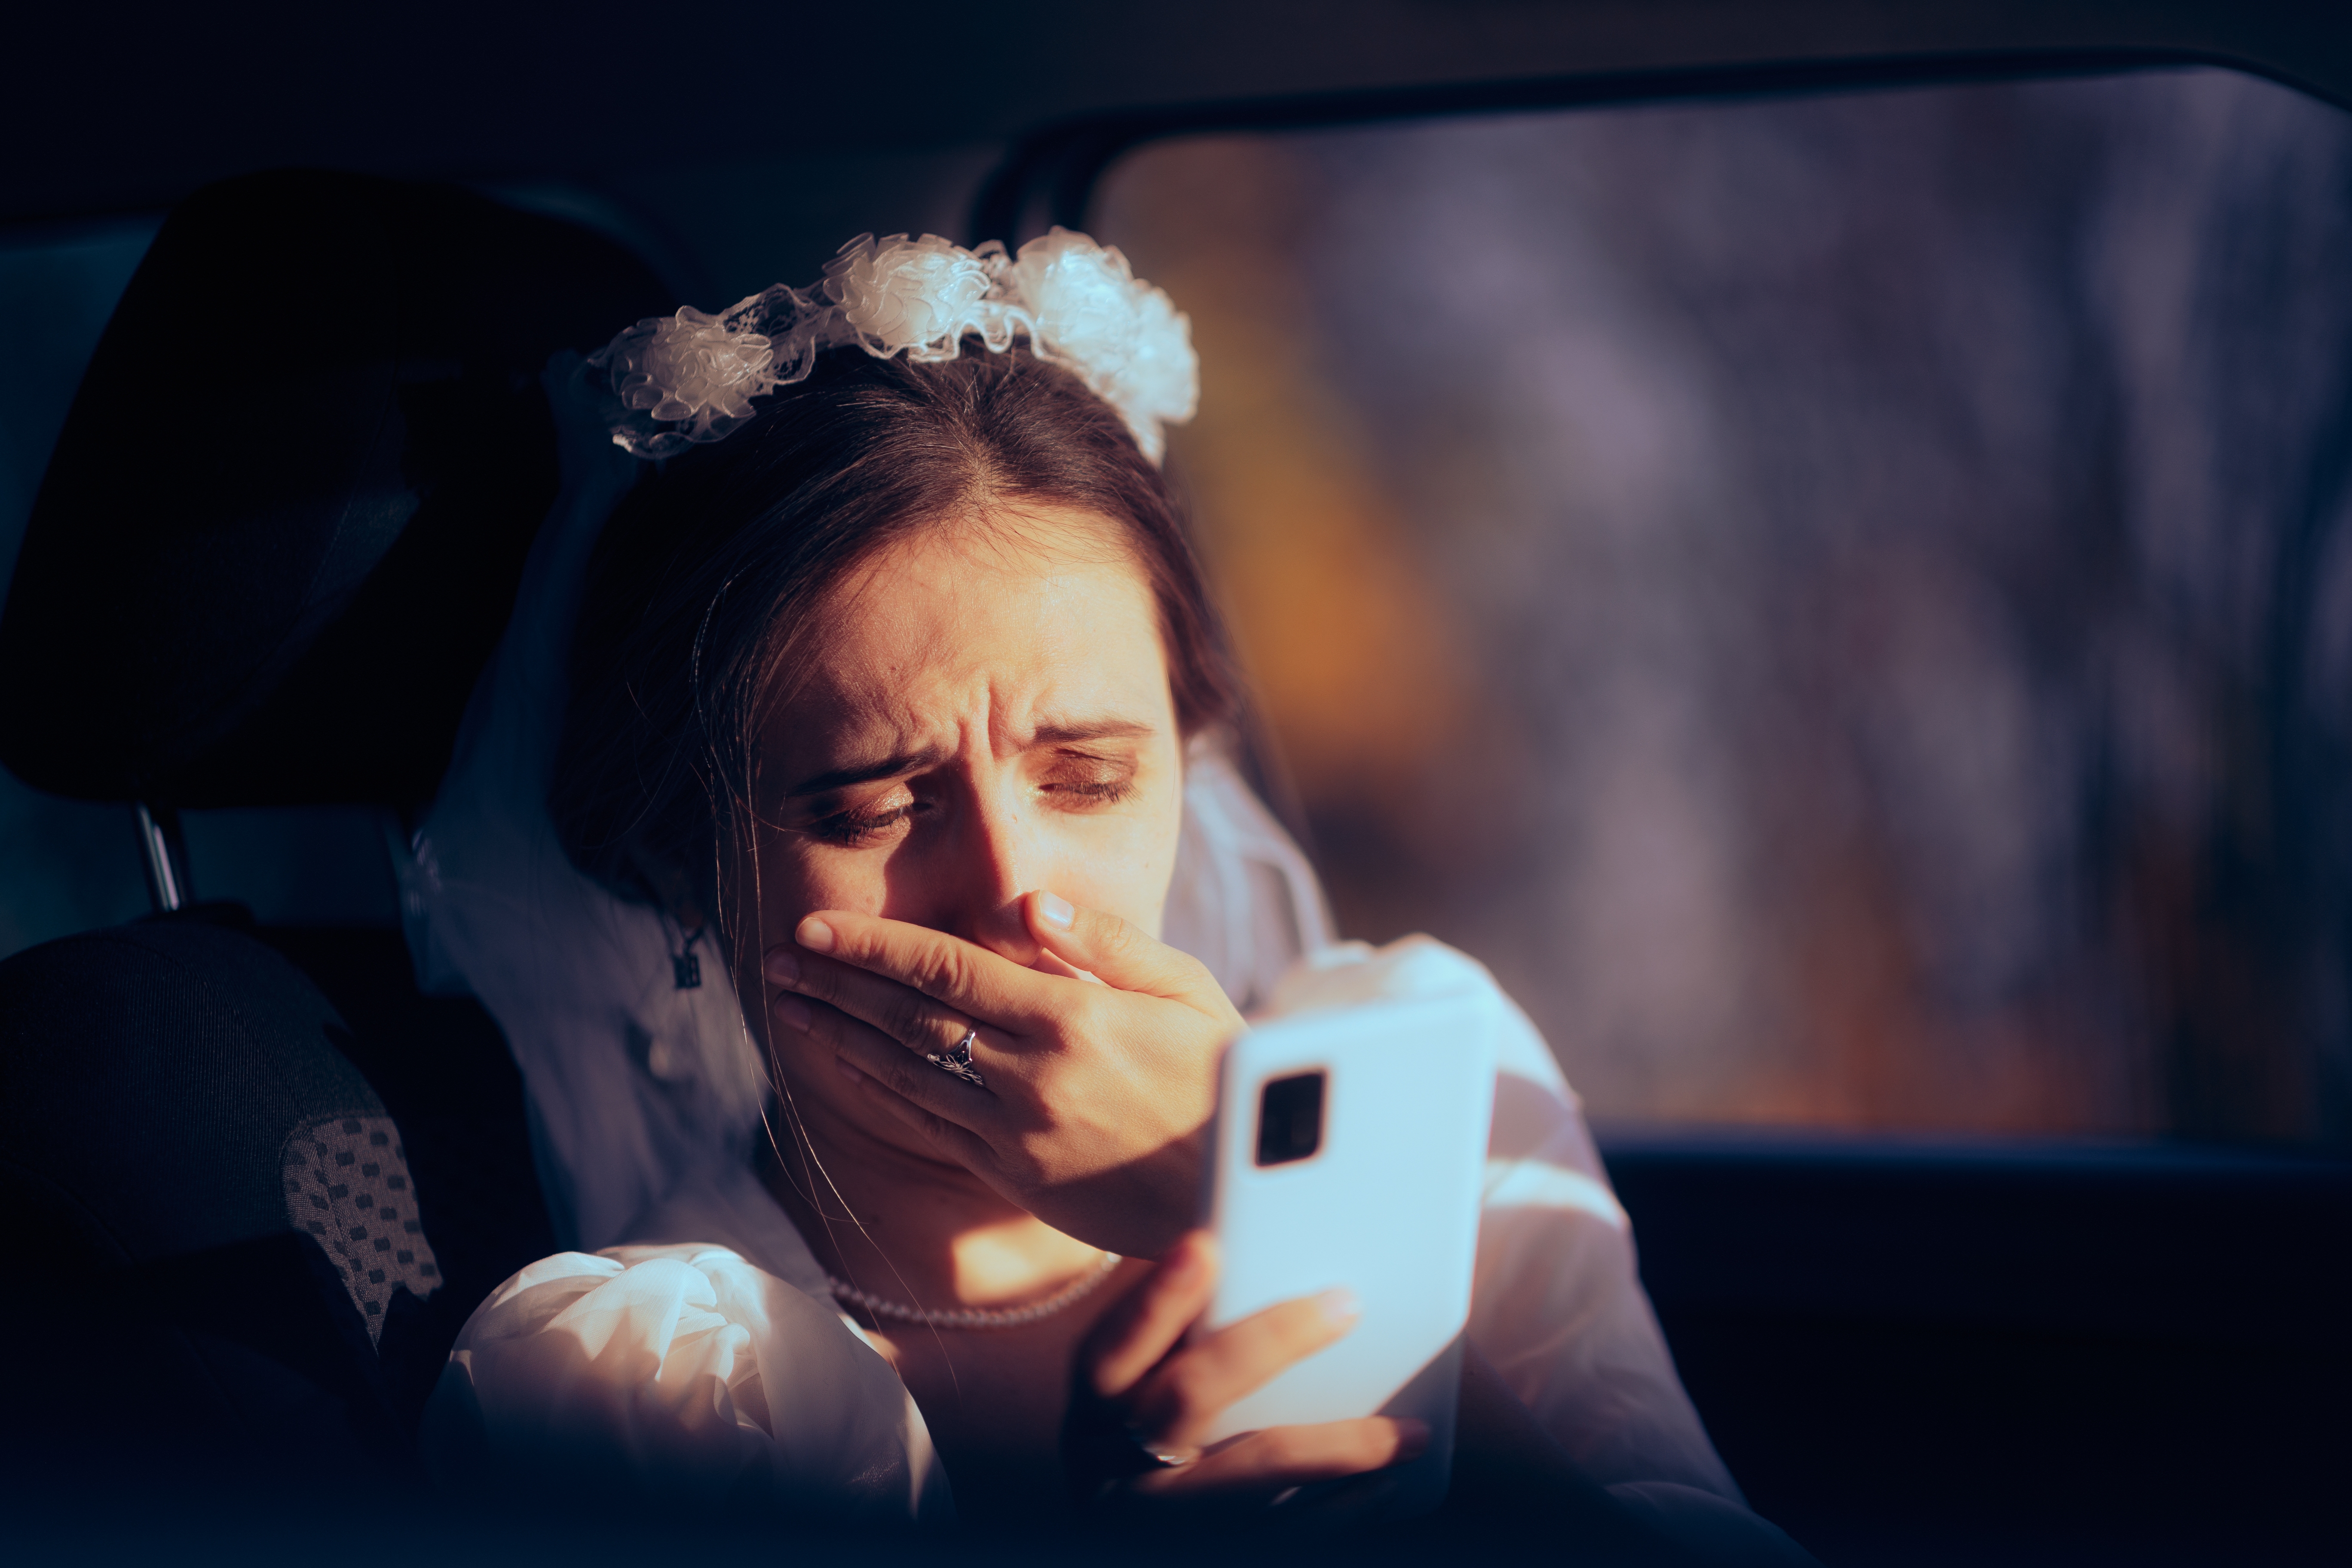 An image of a bride reading something upsetting on her phone | Source: Shutterstock